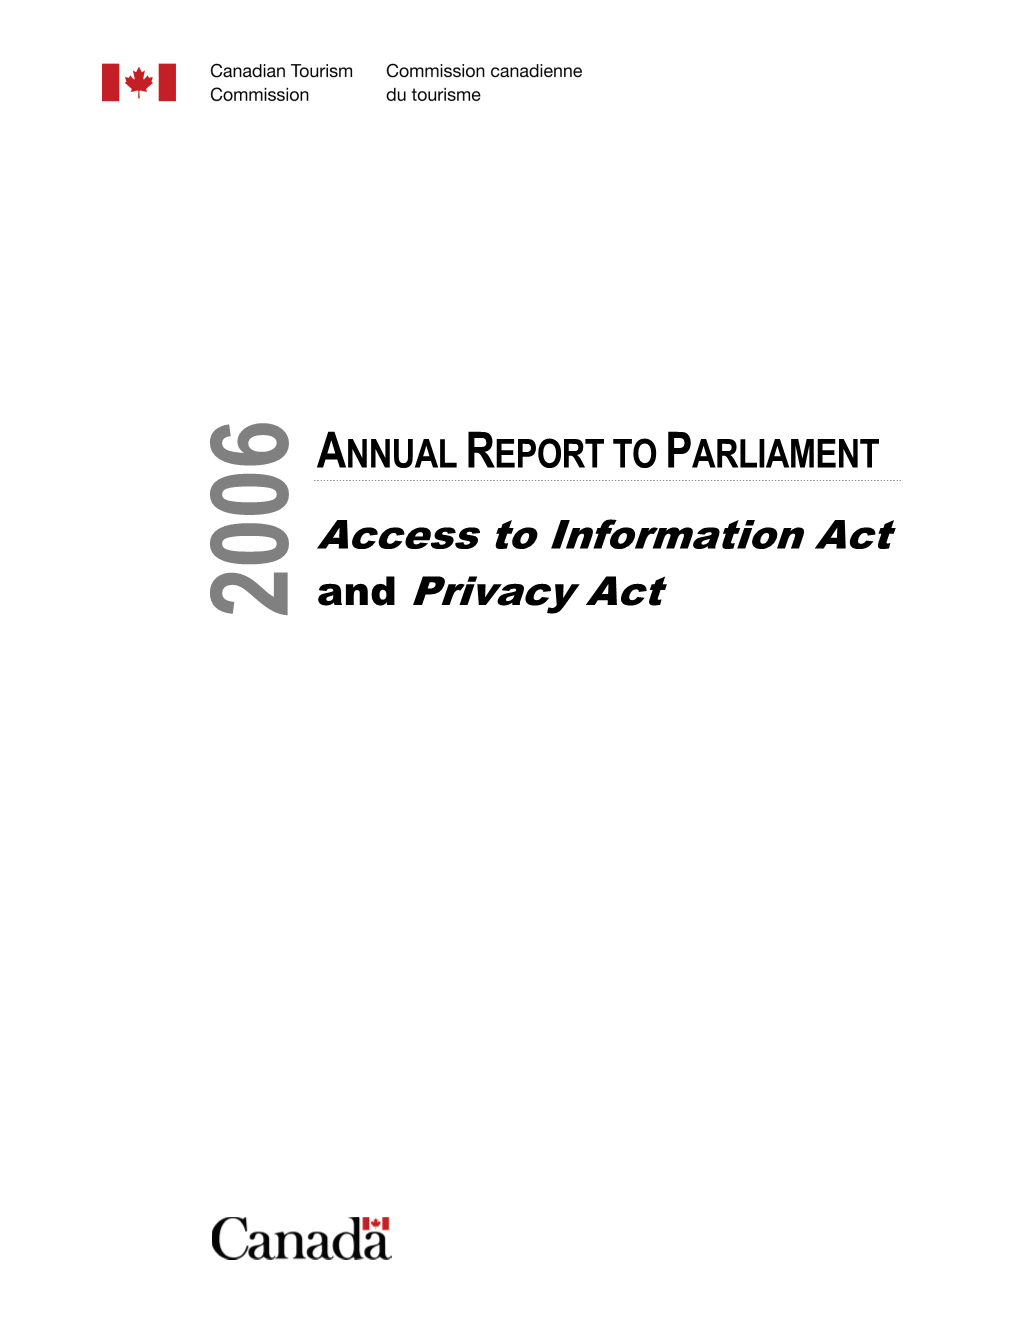 Access to Information Act Nd Privacy